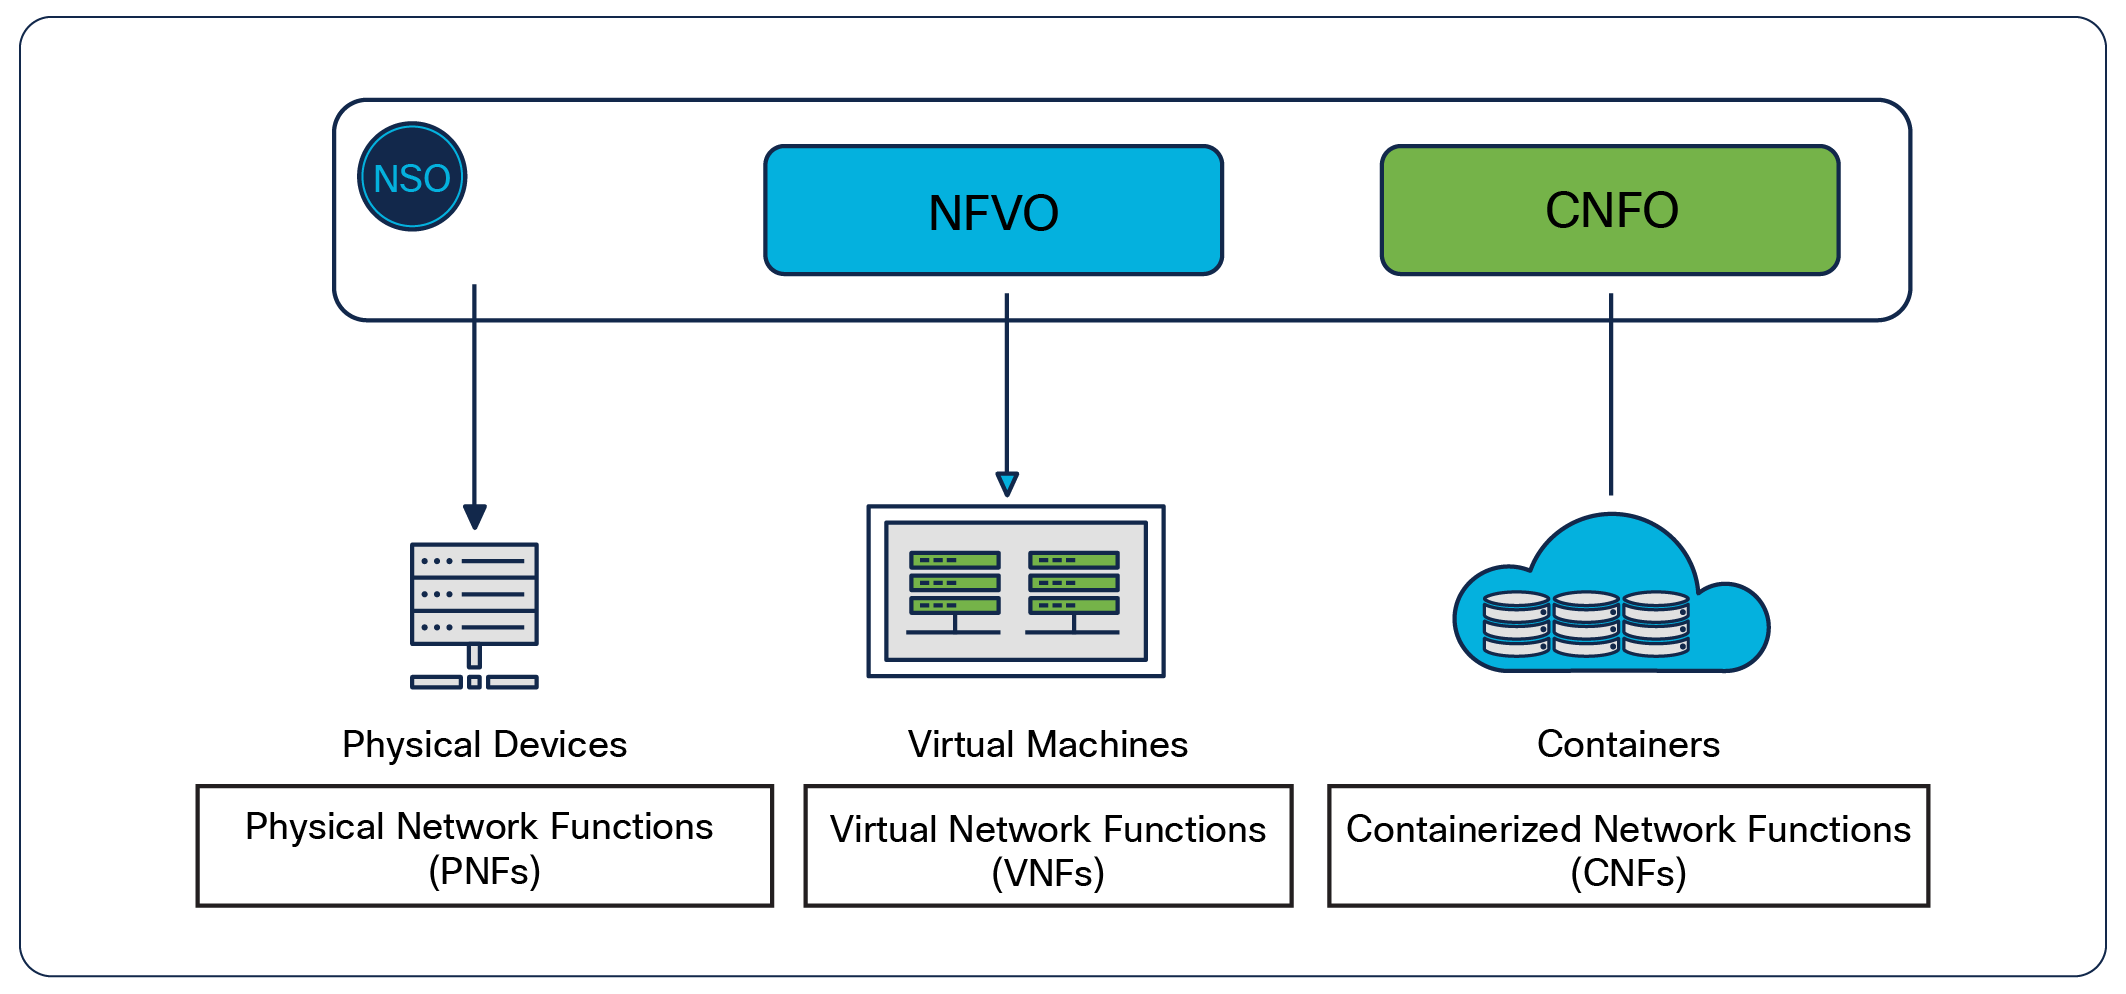 With CNFO, NSO can orchestrate physical, virtual, and cloud-native network functions.